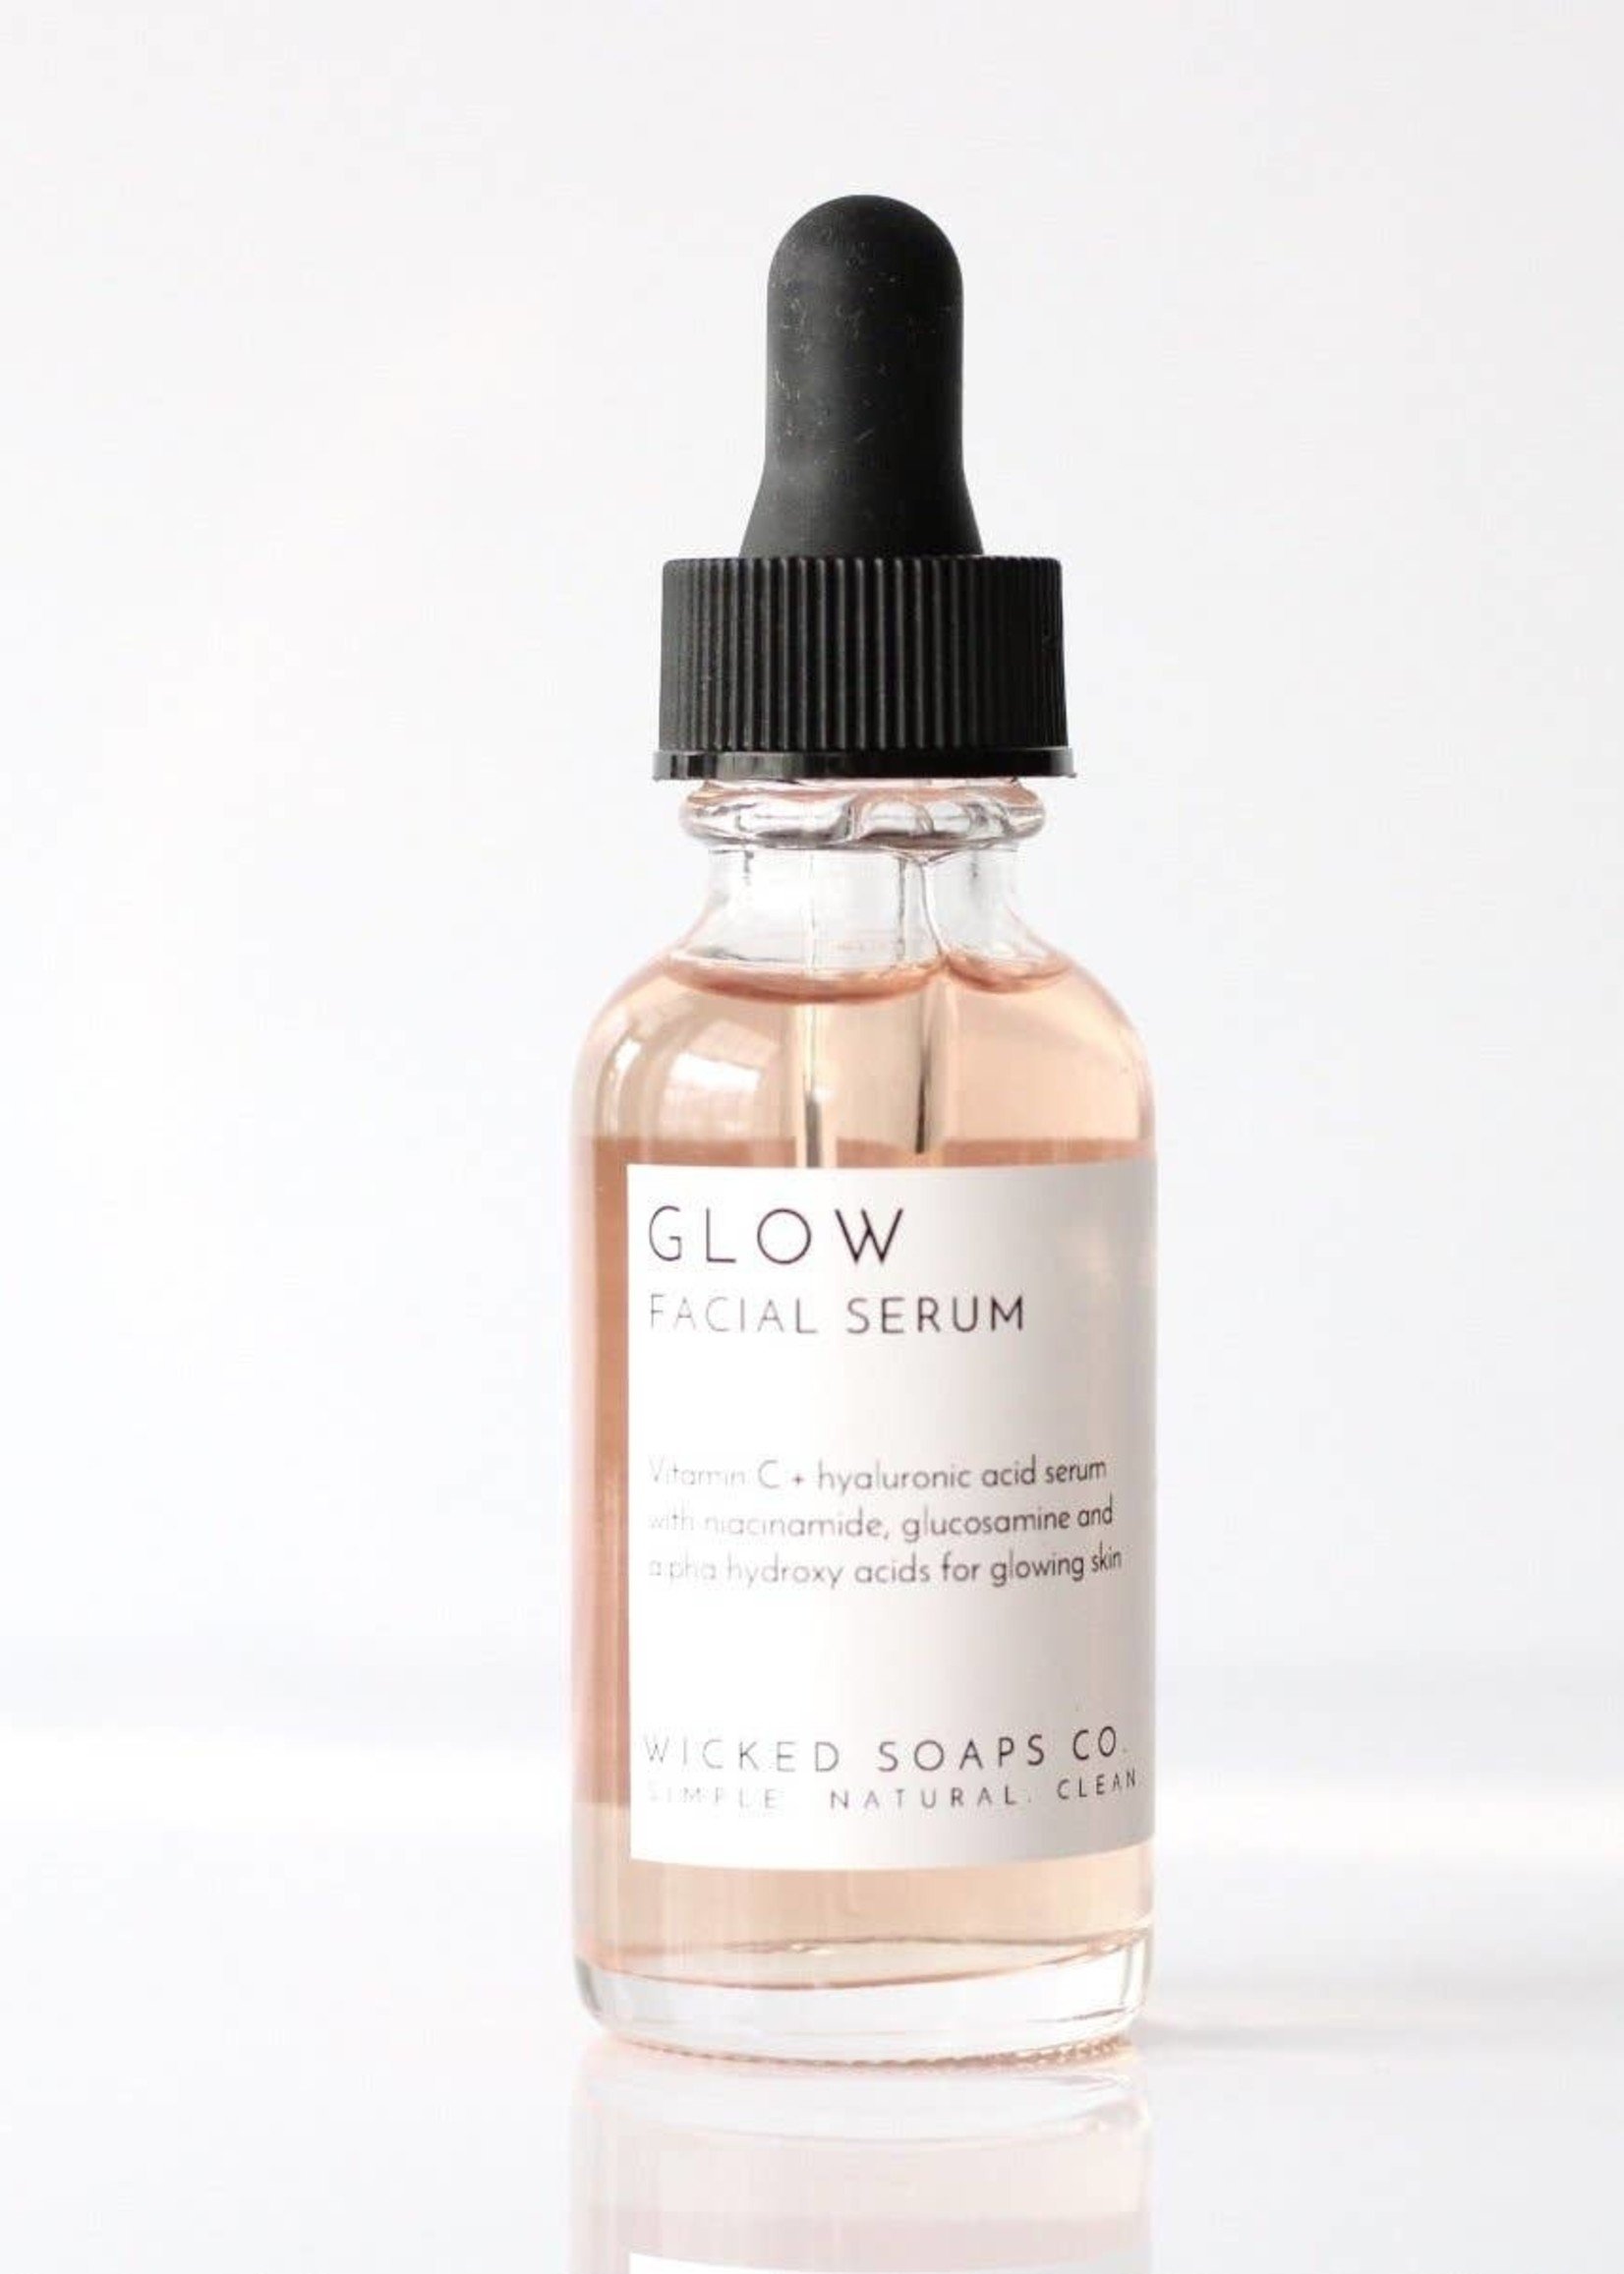 Wicked Soaps Co. Glow Facial Serum